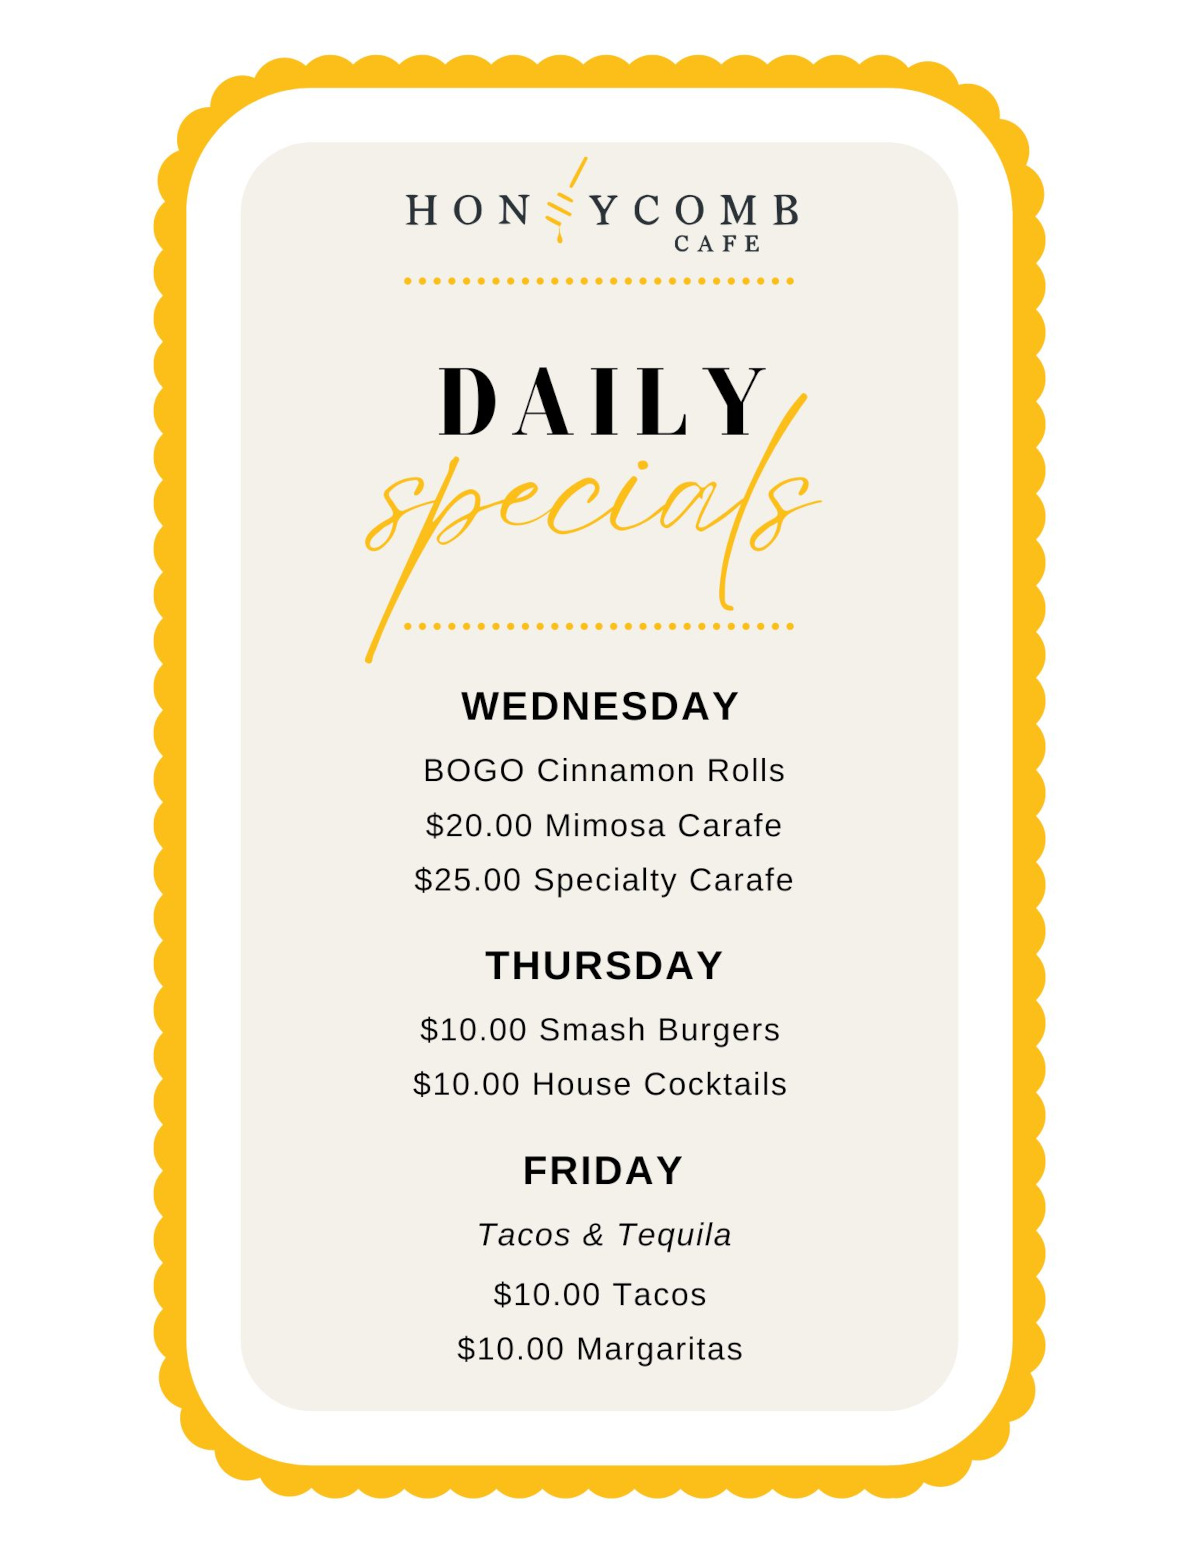 Daily specials flyer